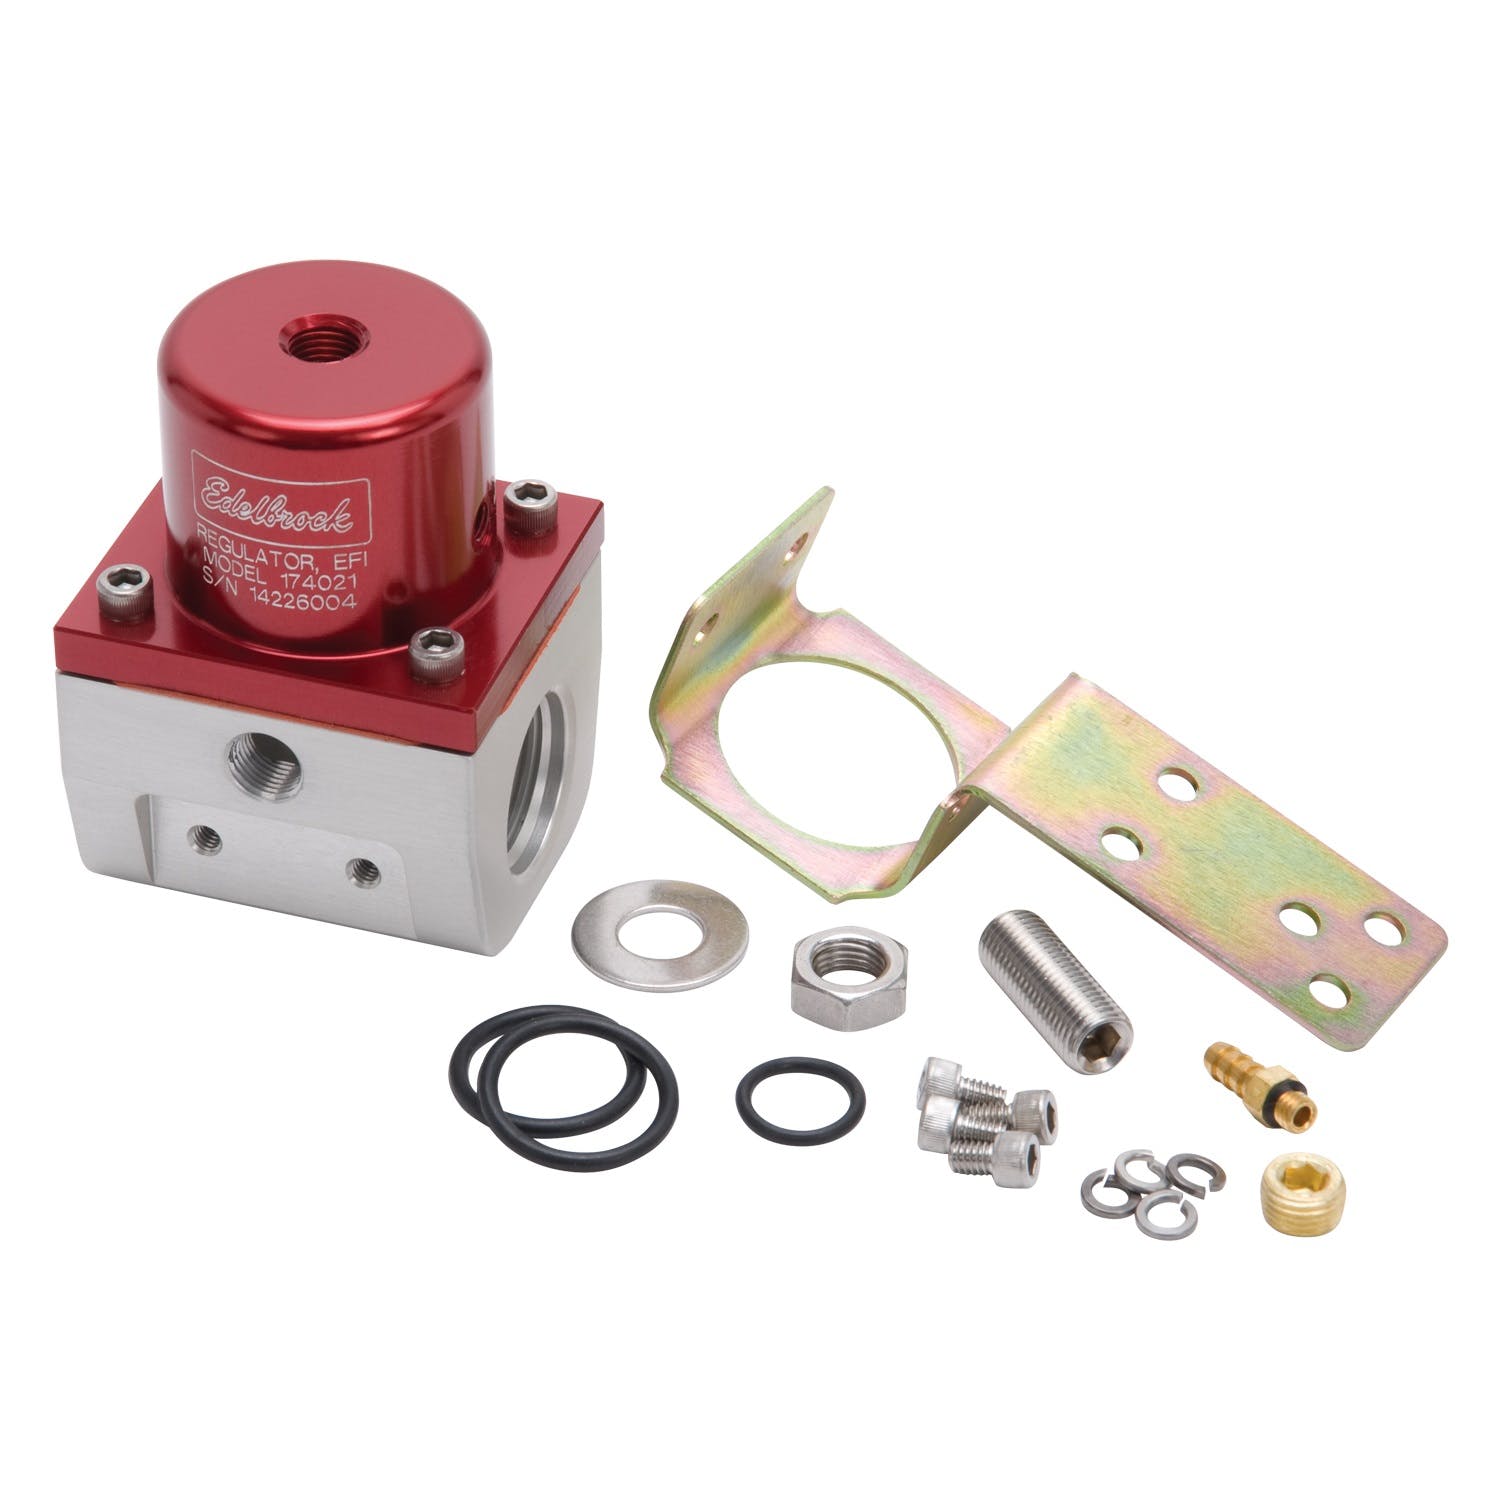 Edelbrock 174021 REGULATOR EFI FUEL PRESSURE -10AN INLET/OUTLET RED/CLEAR BODY ANODIZED FINISH